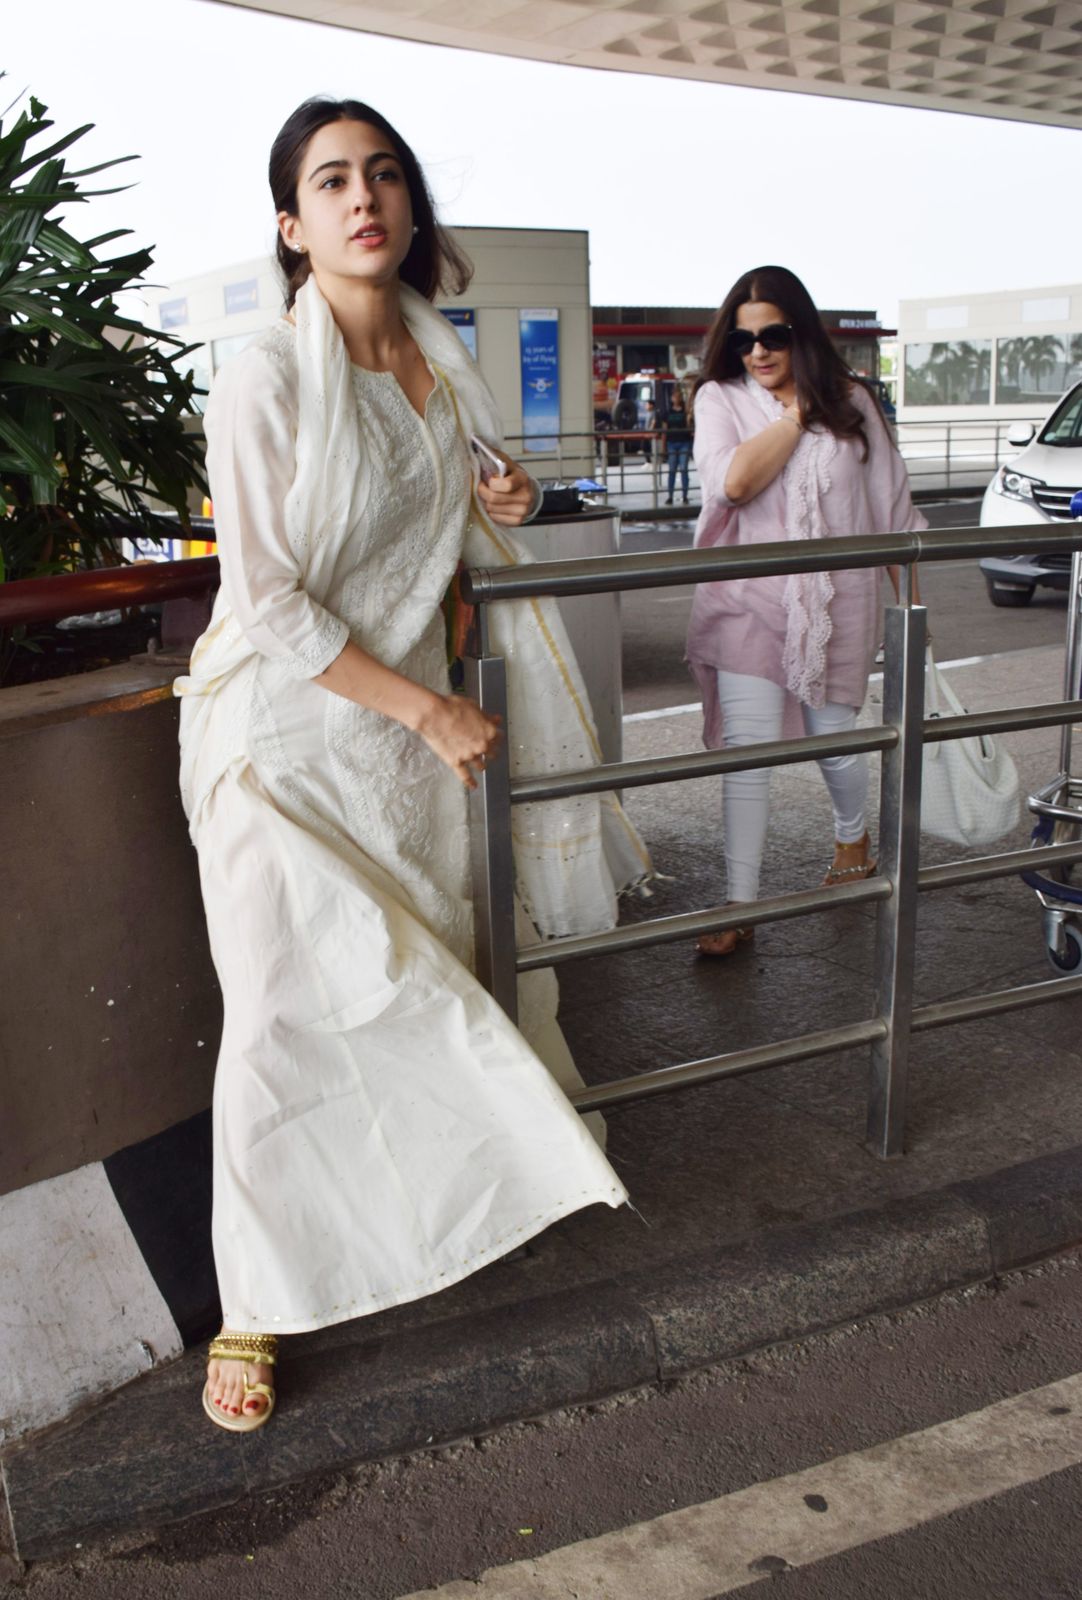 Sara Ali Khan Reveals U.S. Airport Authorities Have Been Suspicious Of Her Because Of Her Surname And Her Passport Picture